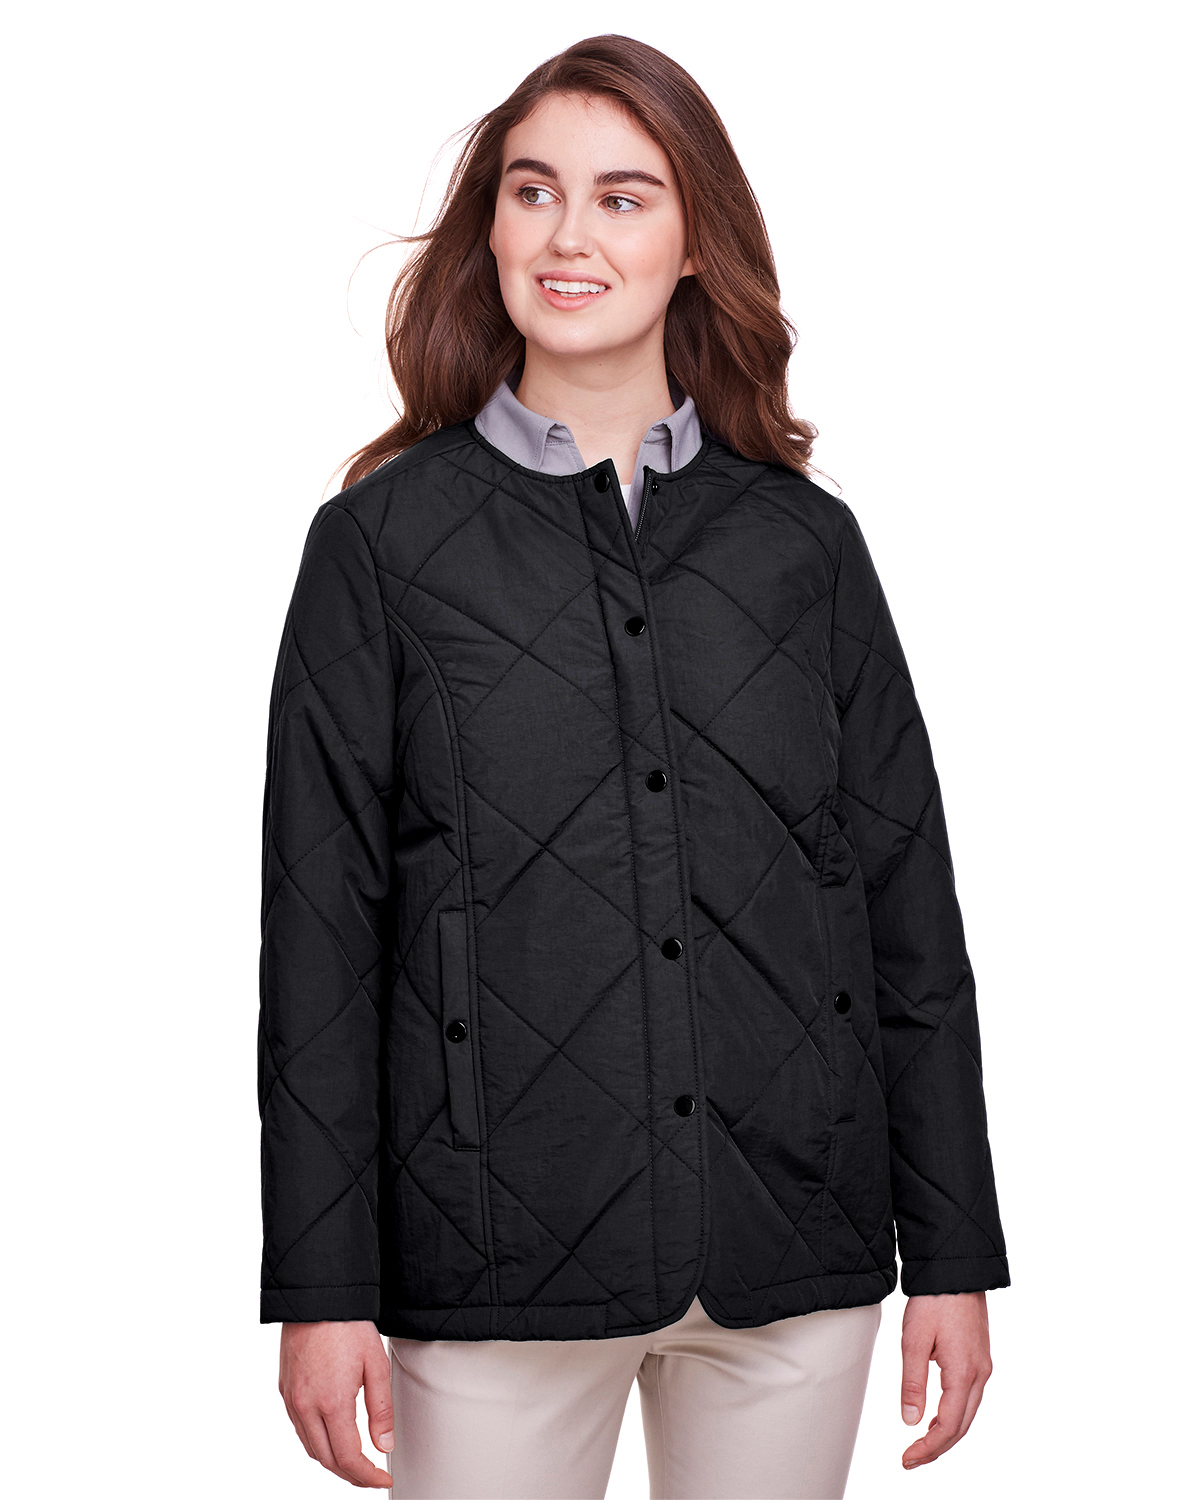 UltraClub UC708W Ladies' Dawson Quilted Hacking Jacket in Bulk Price